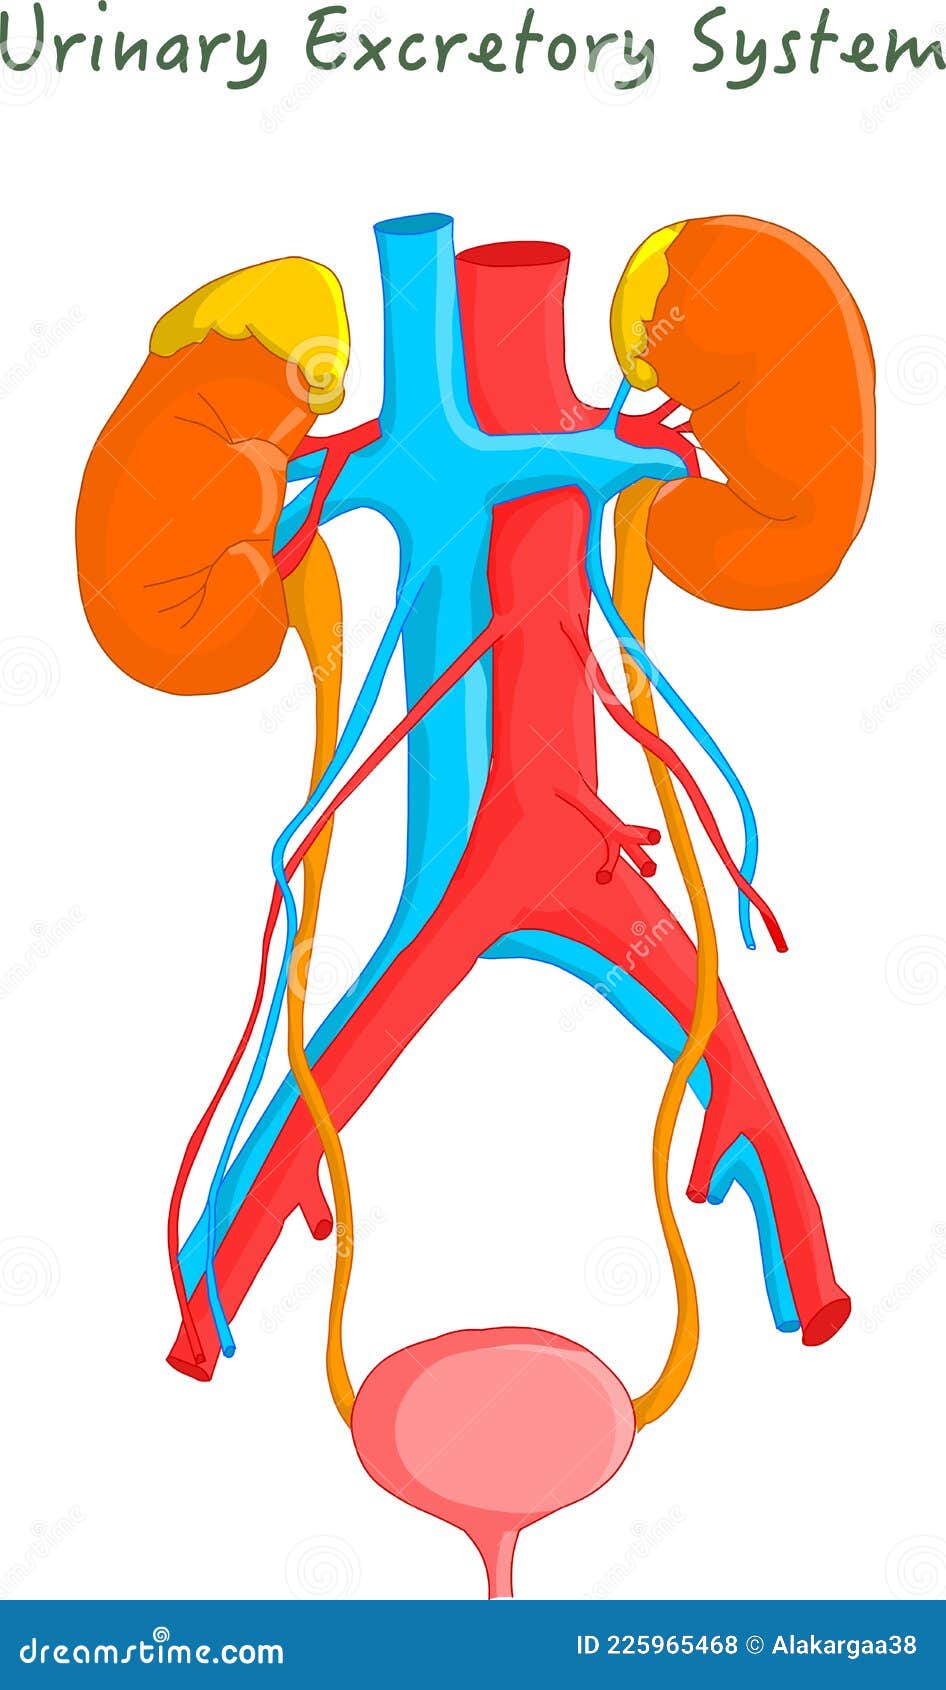 Slagter - Drawing Anatomy of the urinary system - no labels | AnatomyTOOL